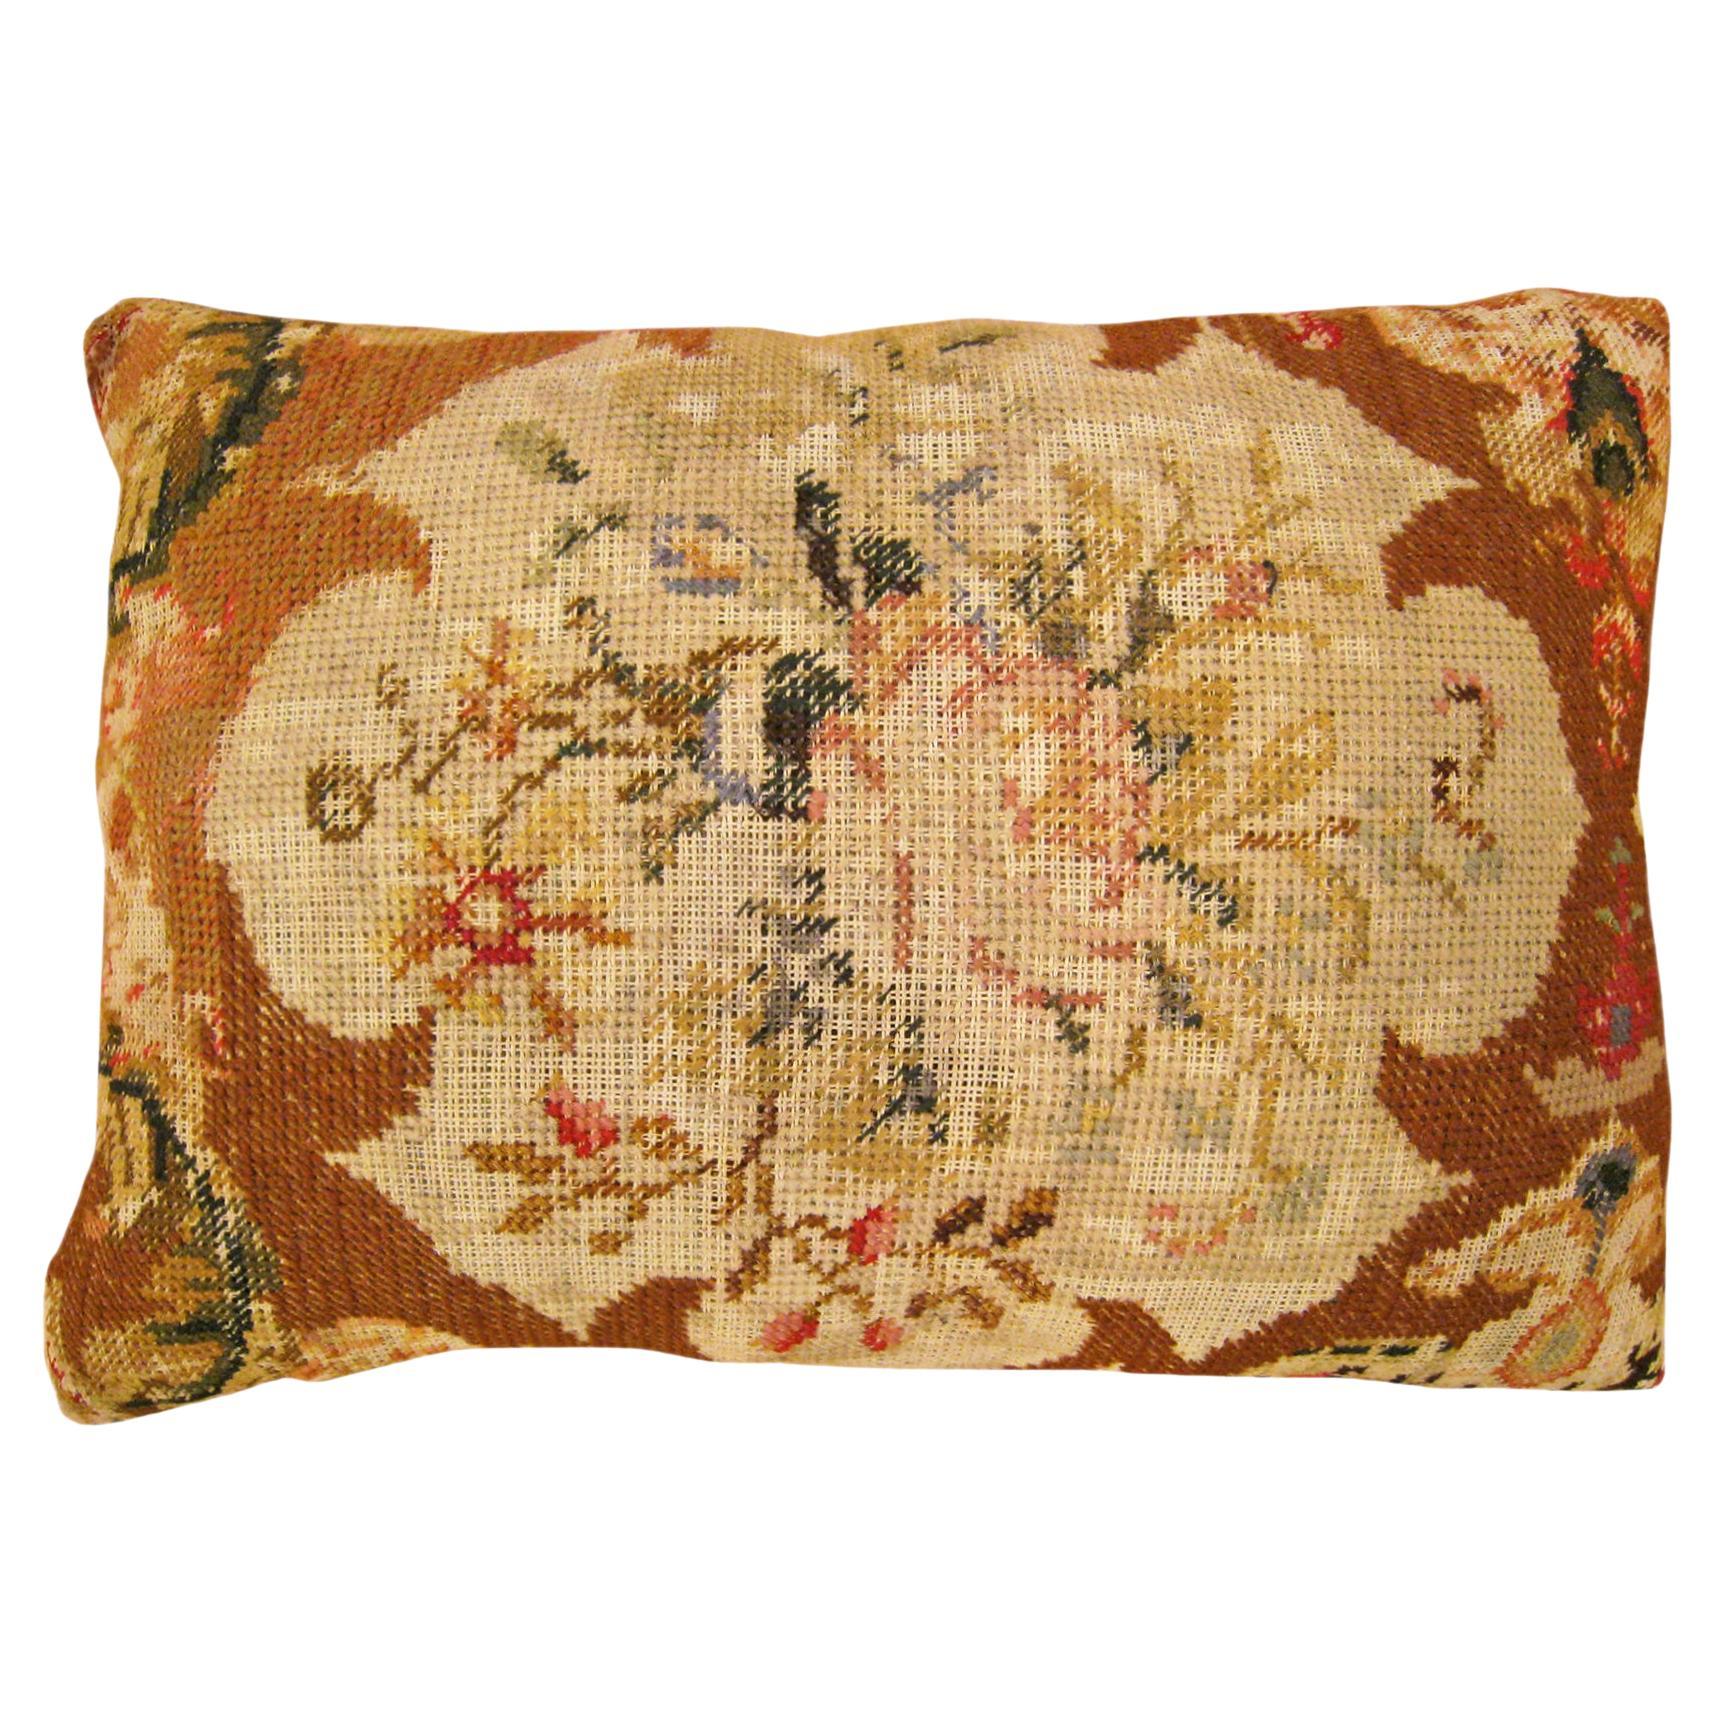 Antique Decorative English Needlepoint Rug Pillow with Floral Elements For Sale